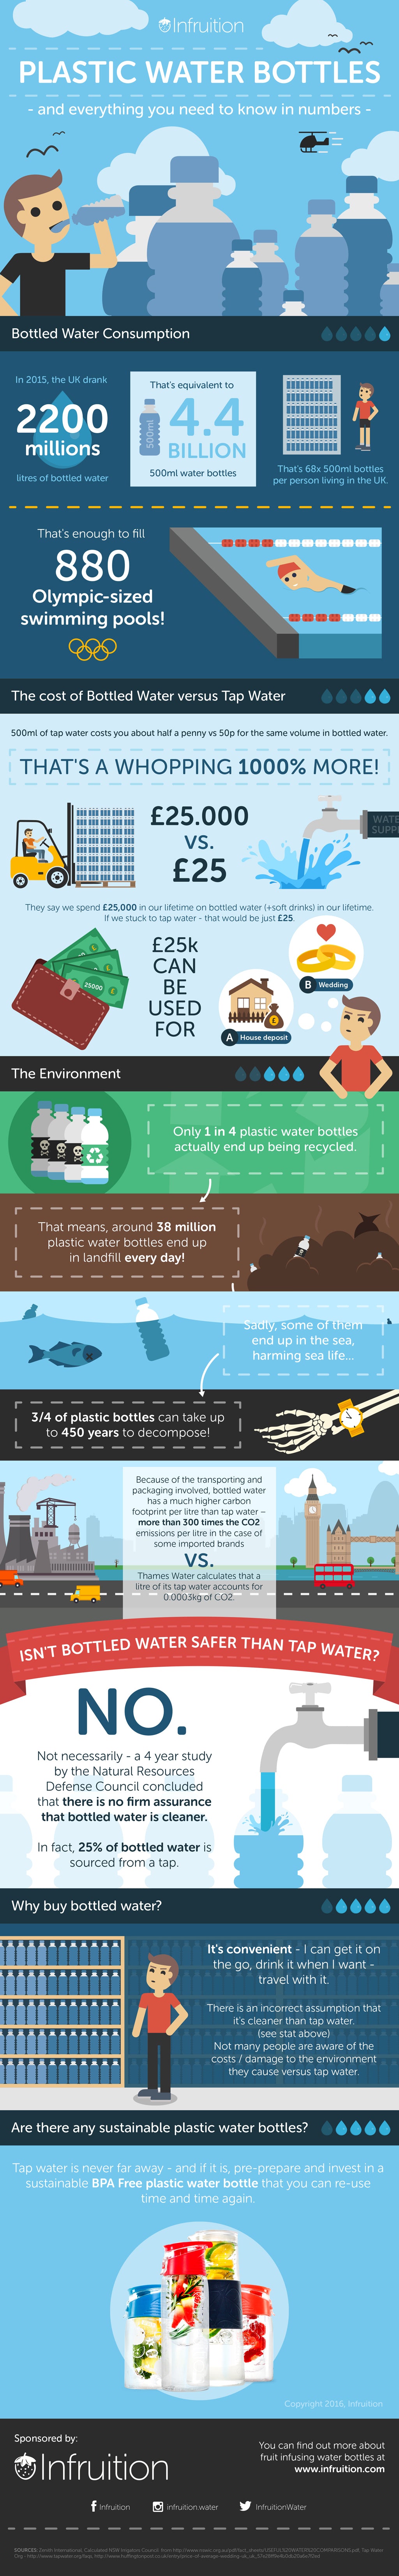 The Ugly Truth about Plastic Water Bottles - an infographic compiled by Infruition